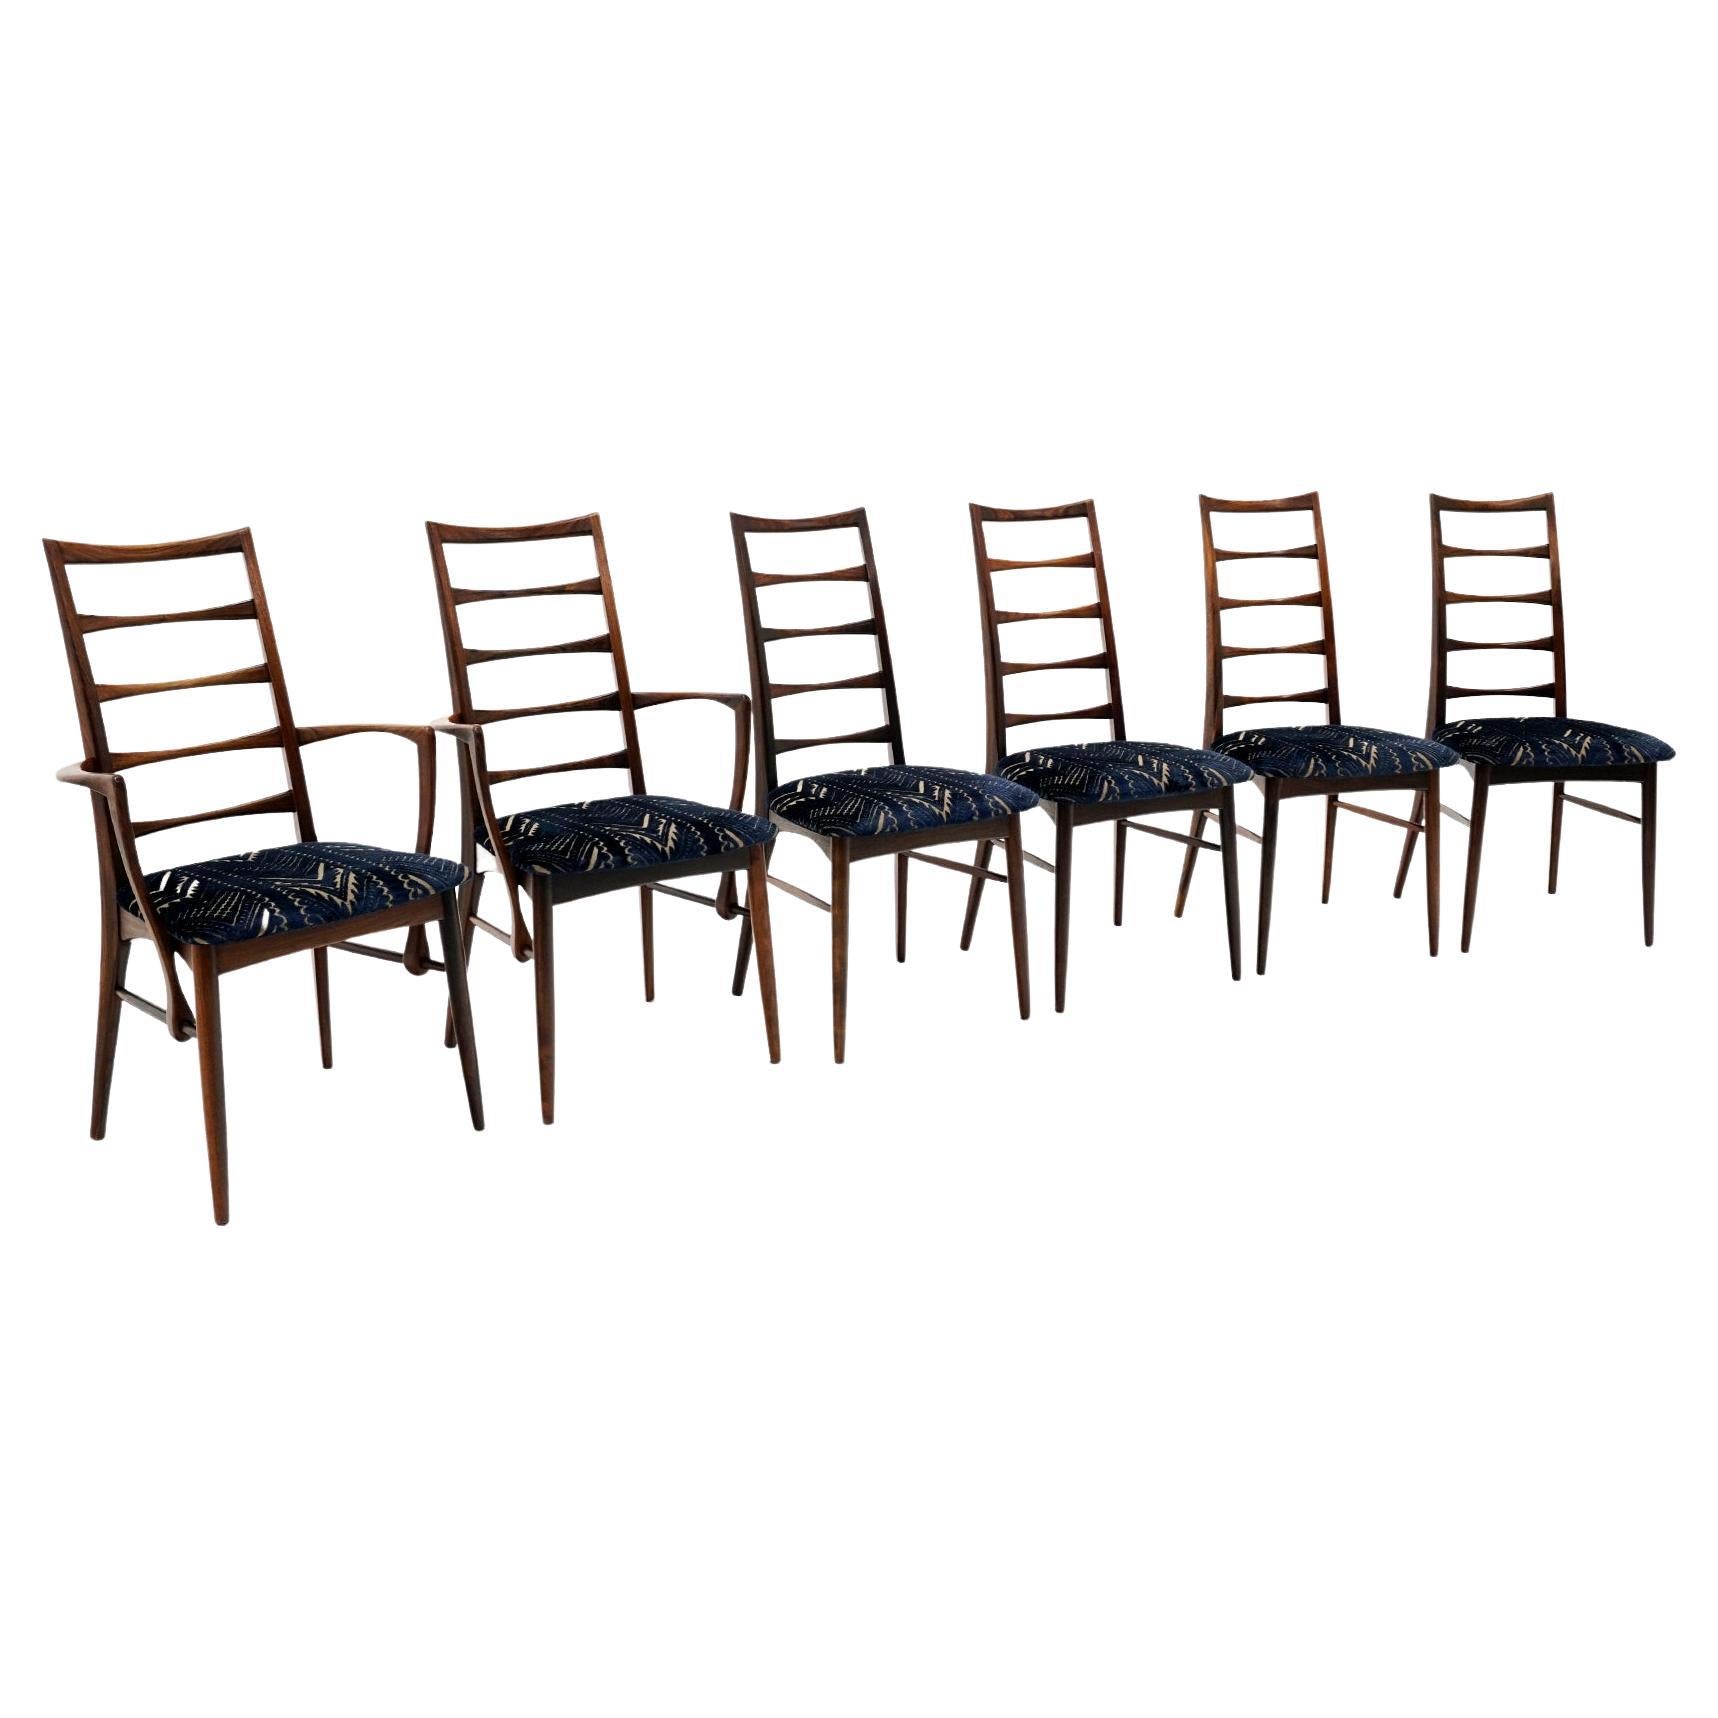 Six Rosewood "Lis" Dining Chairs by Niels Kofoed, Two with Arms, Four Armless